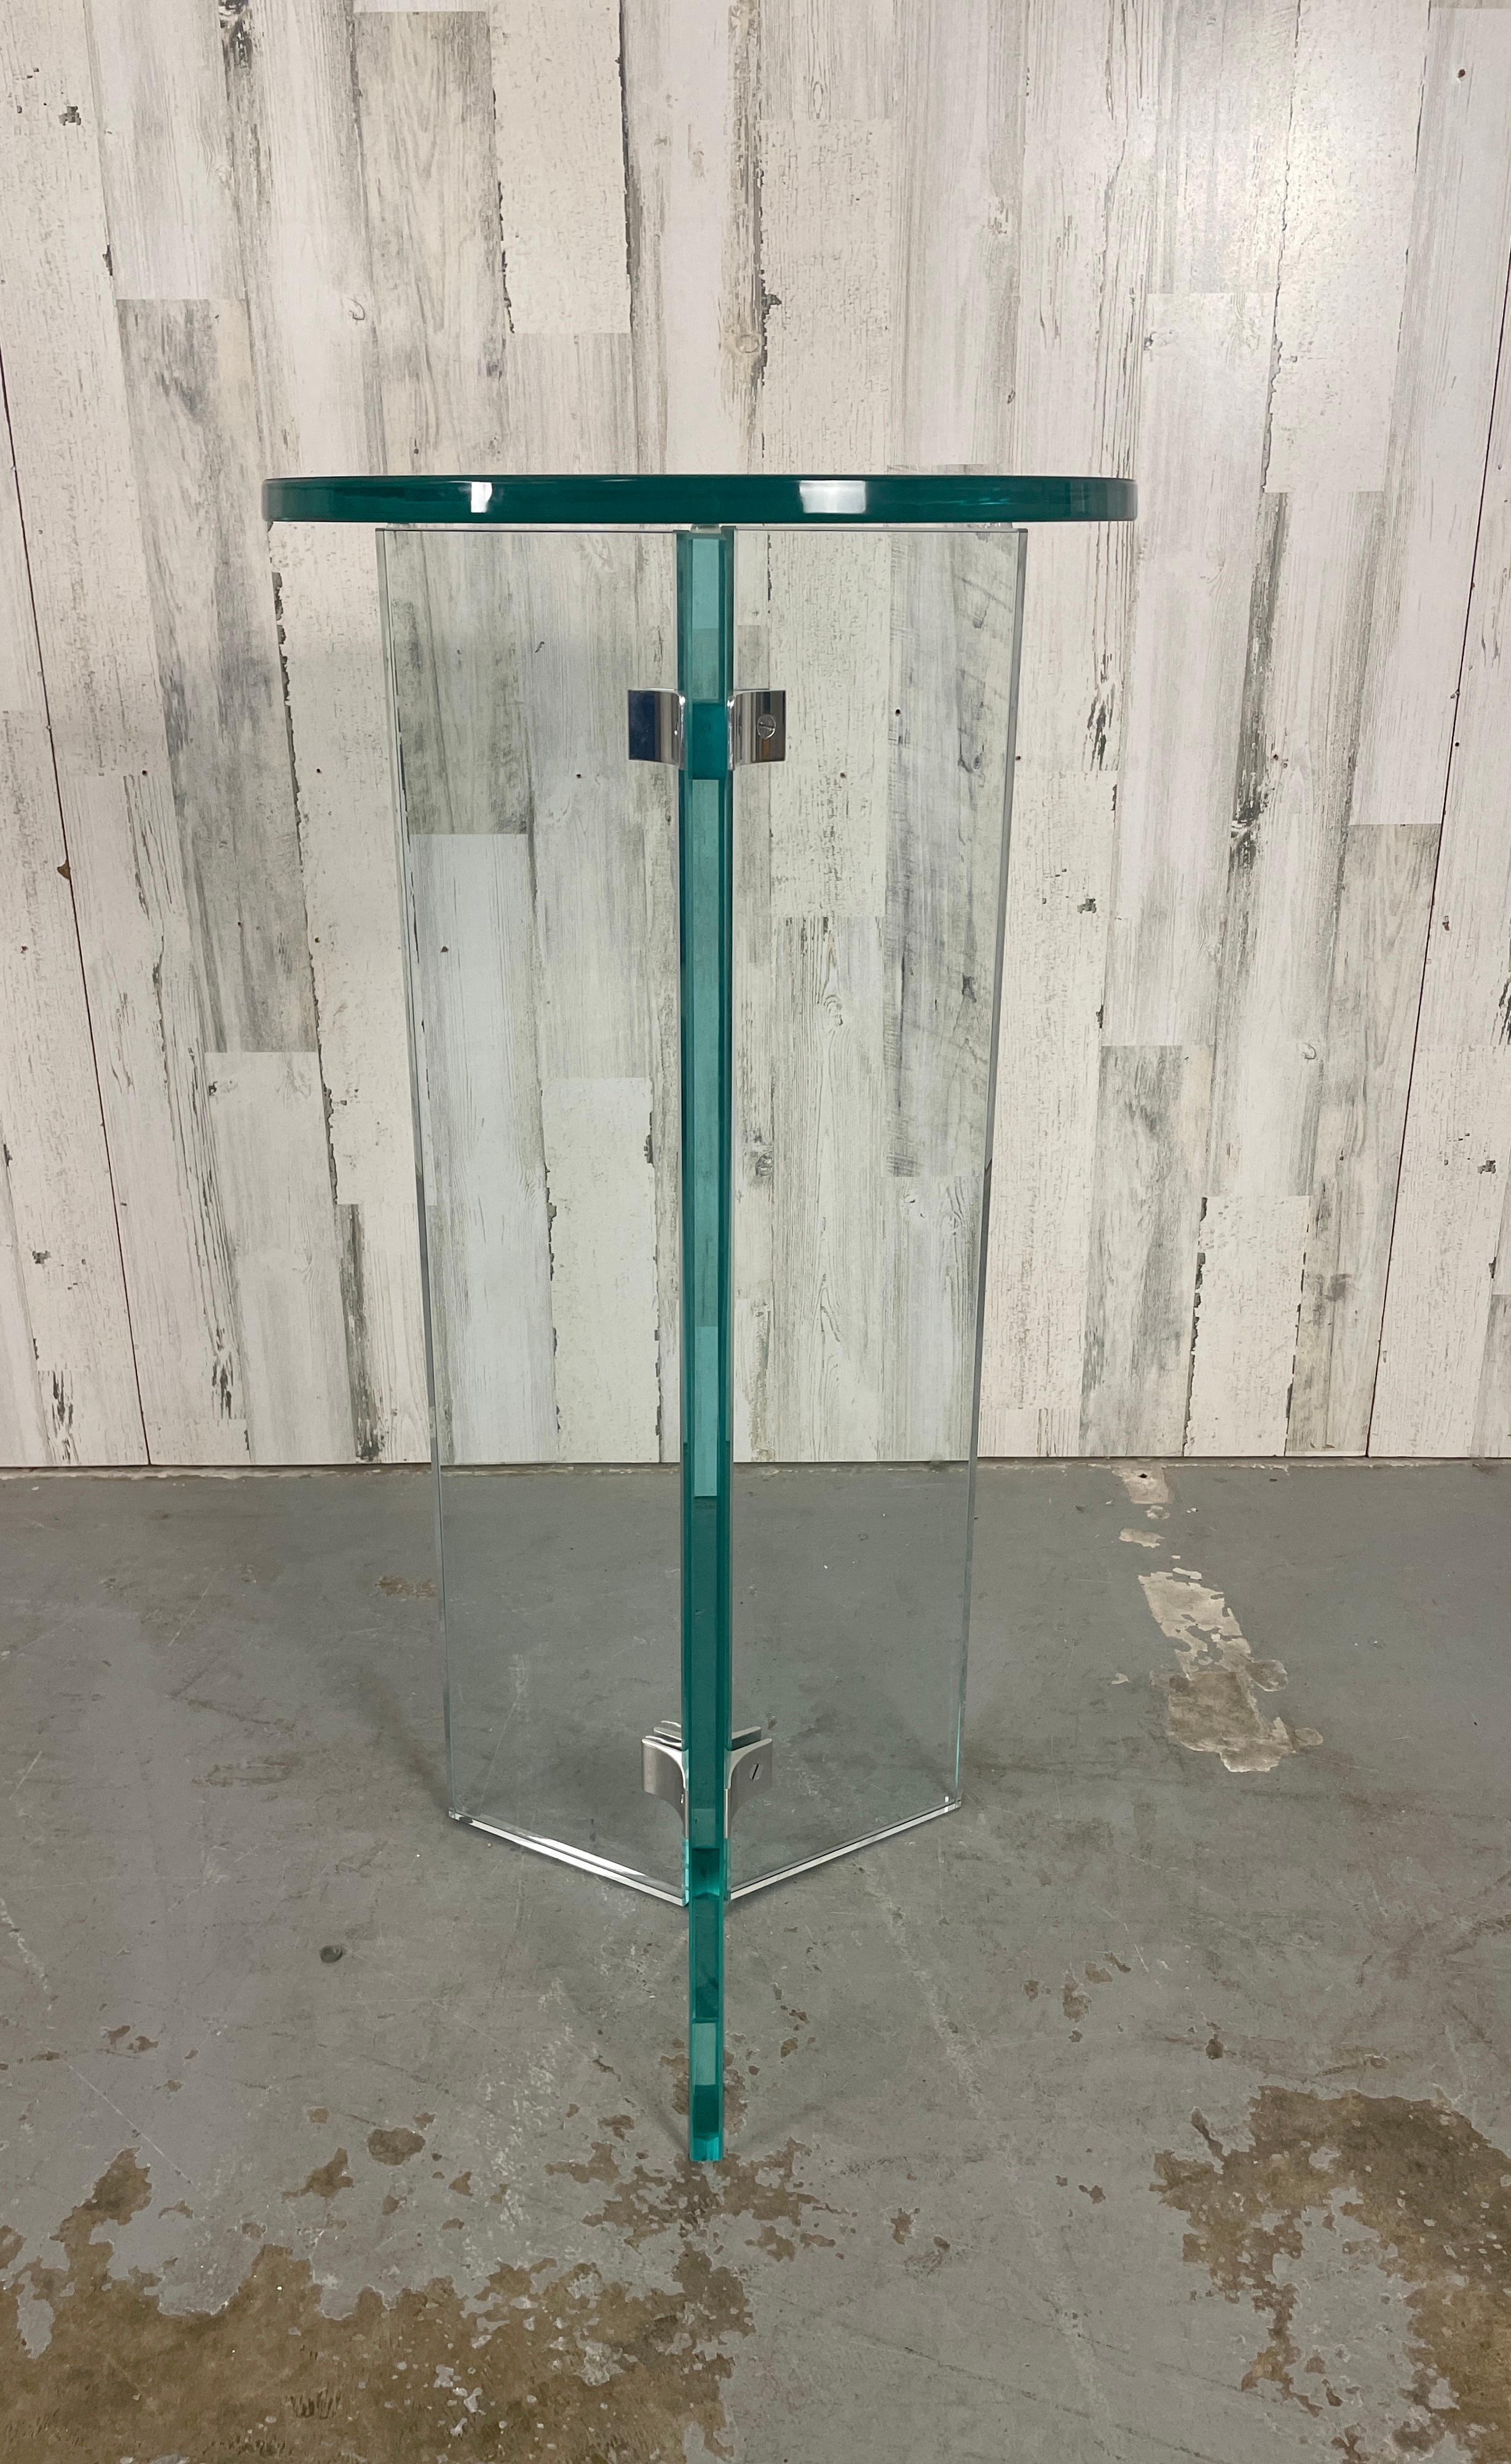 Pace Collection Pedestal / Plant Stand. Modern Glass Architectural Column that can be used for sculptures or plants. 